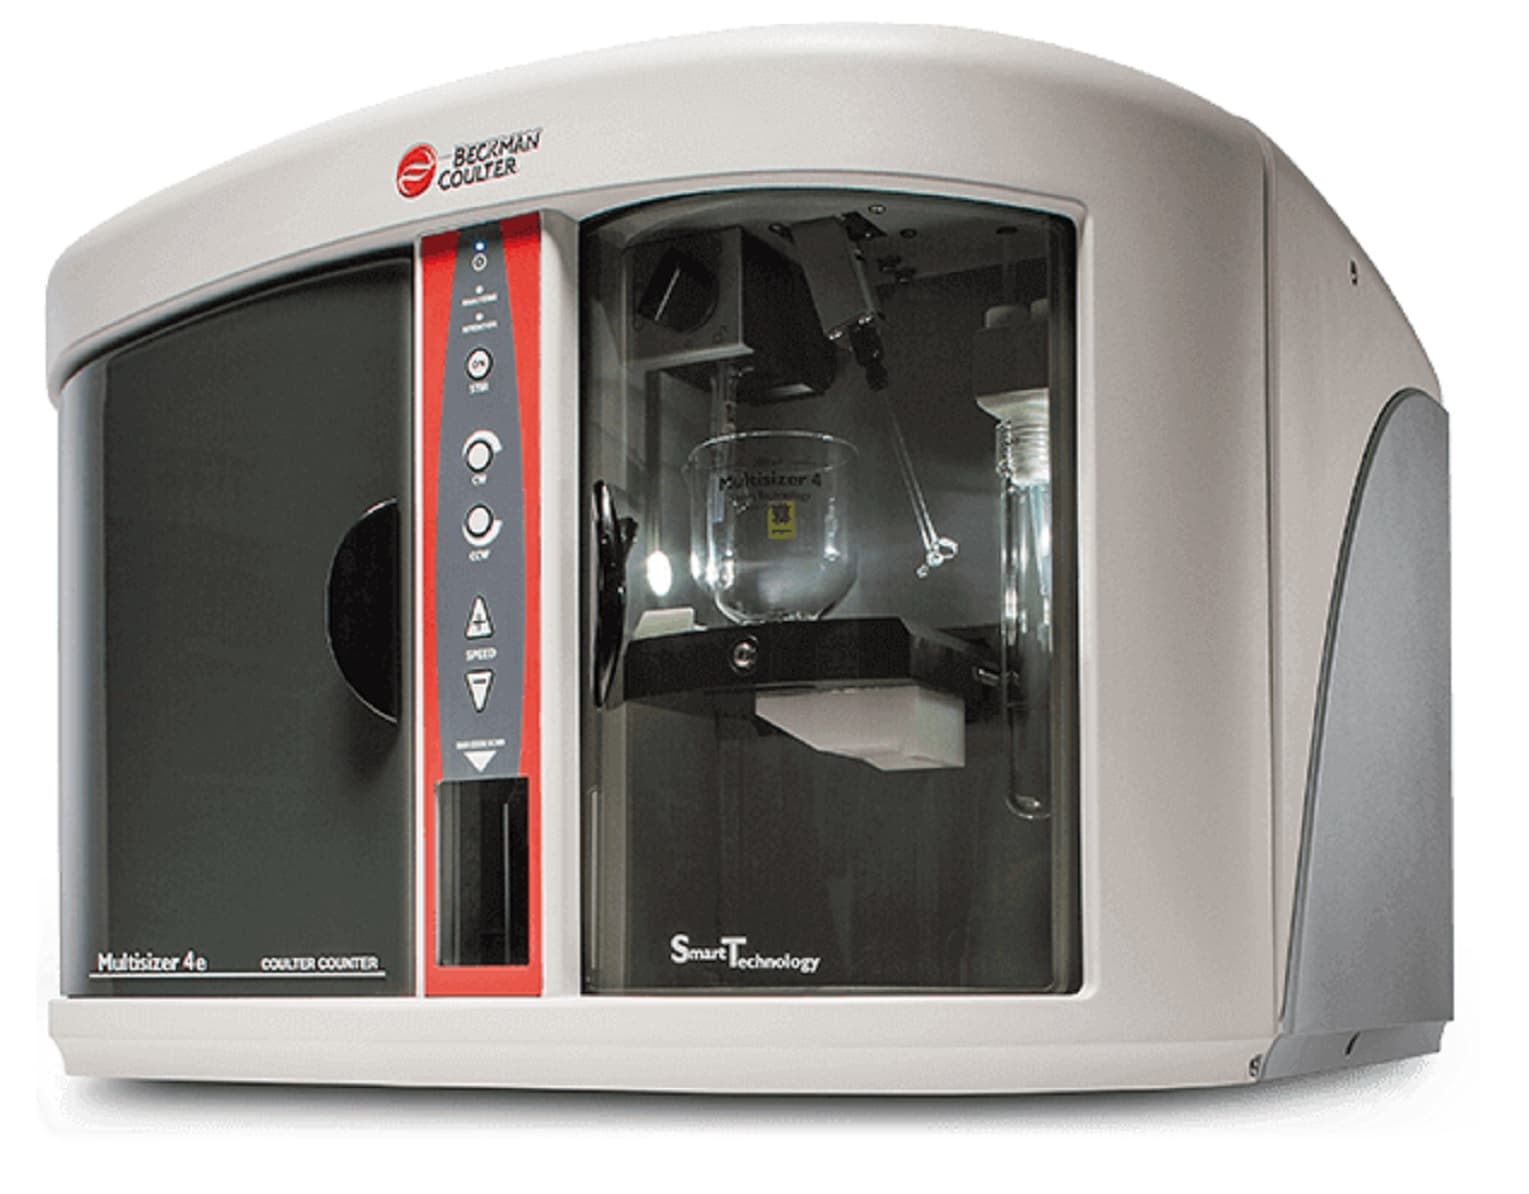 Multisizer 4e, Beckman Coulter, Particle counting